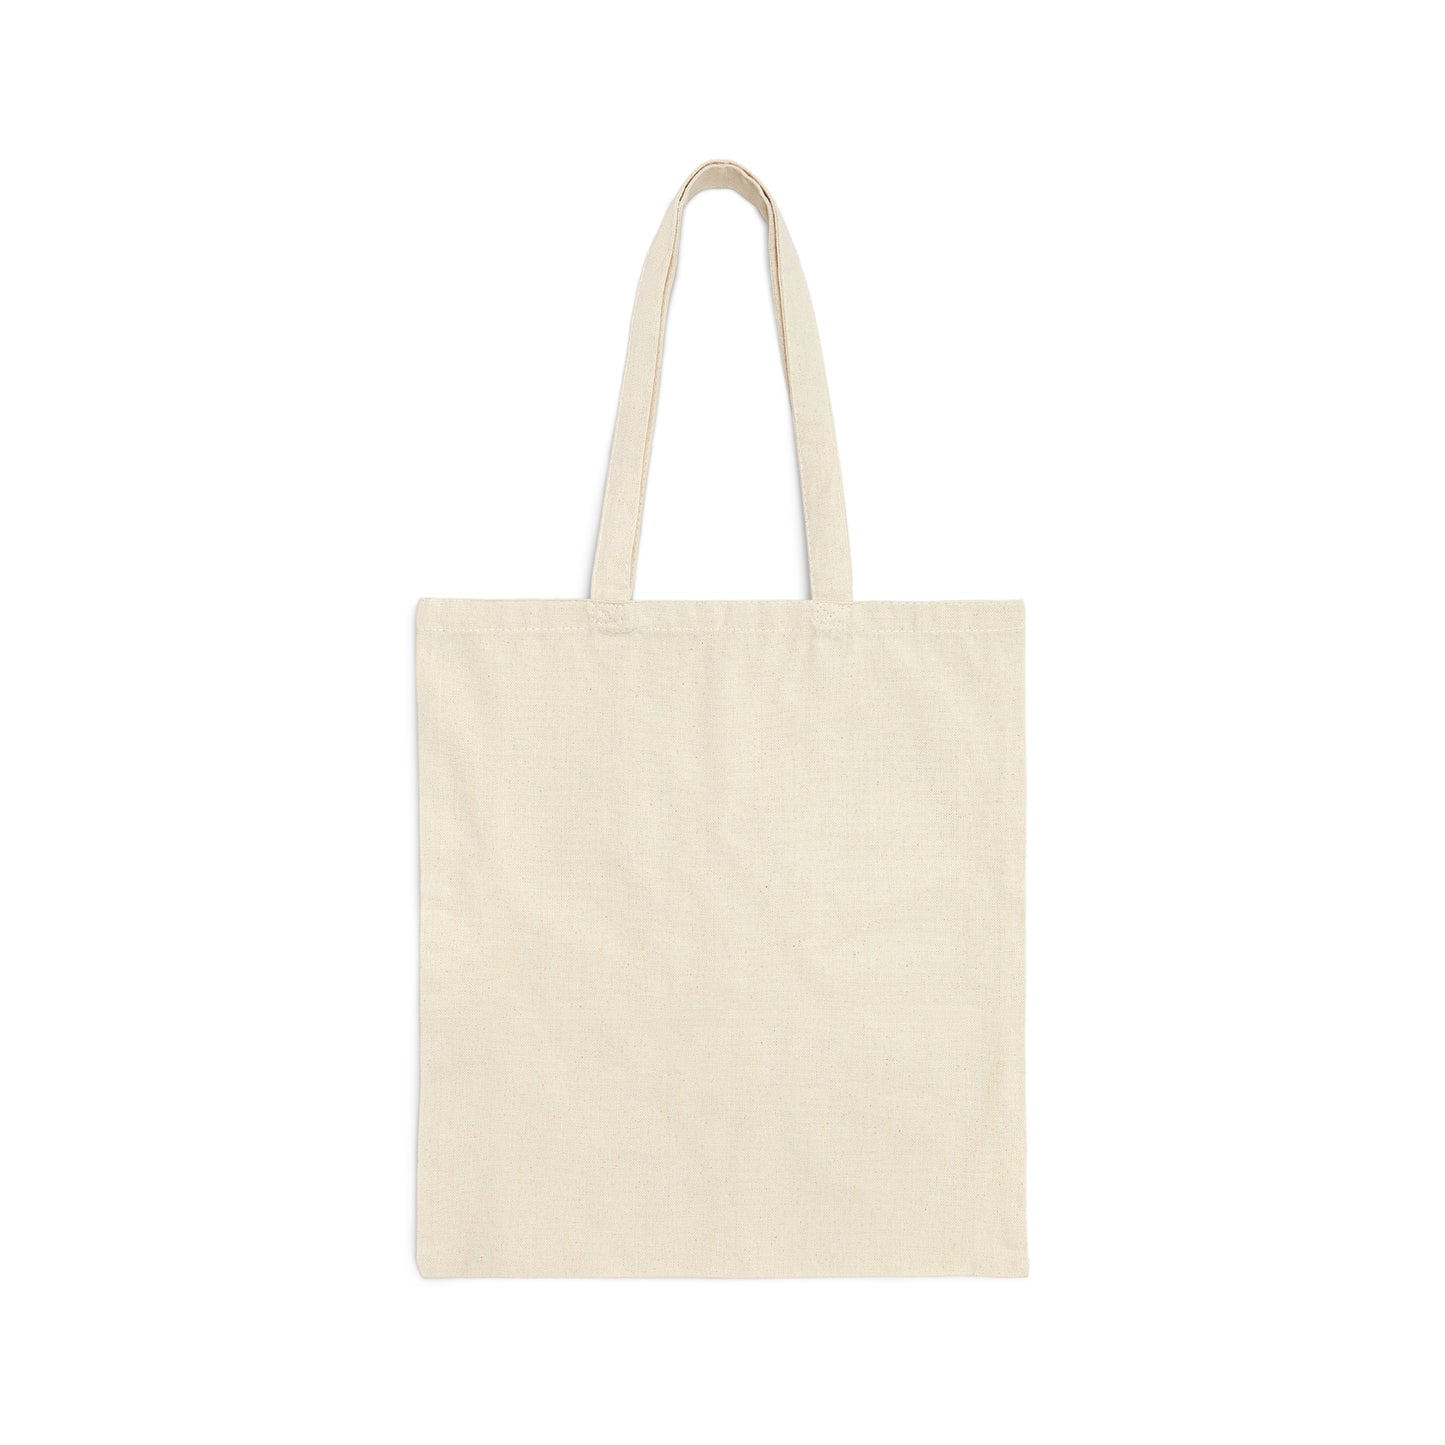 Can you knit me a... Cotton Canvas Tote Bag